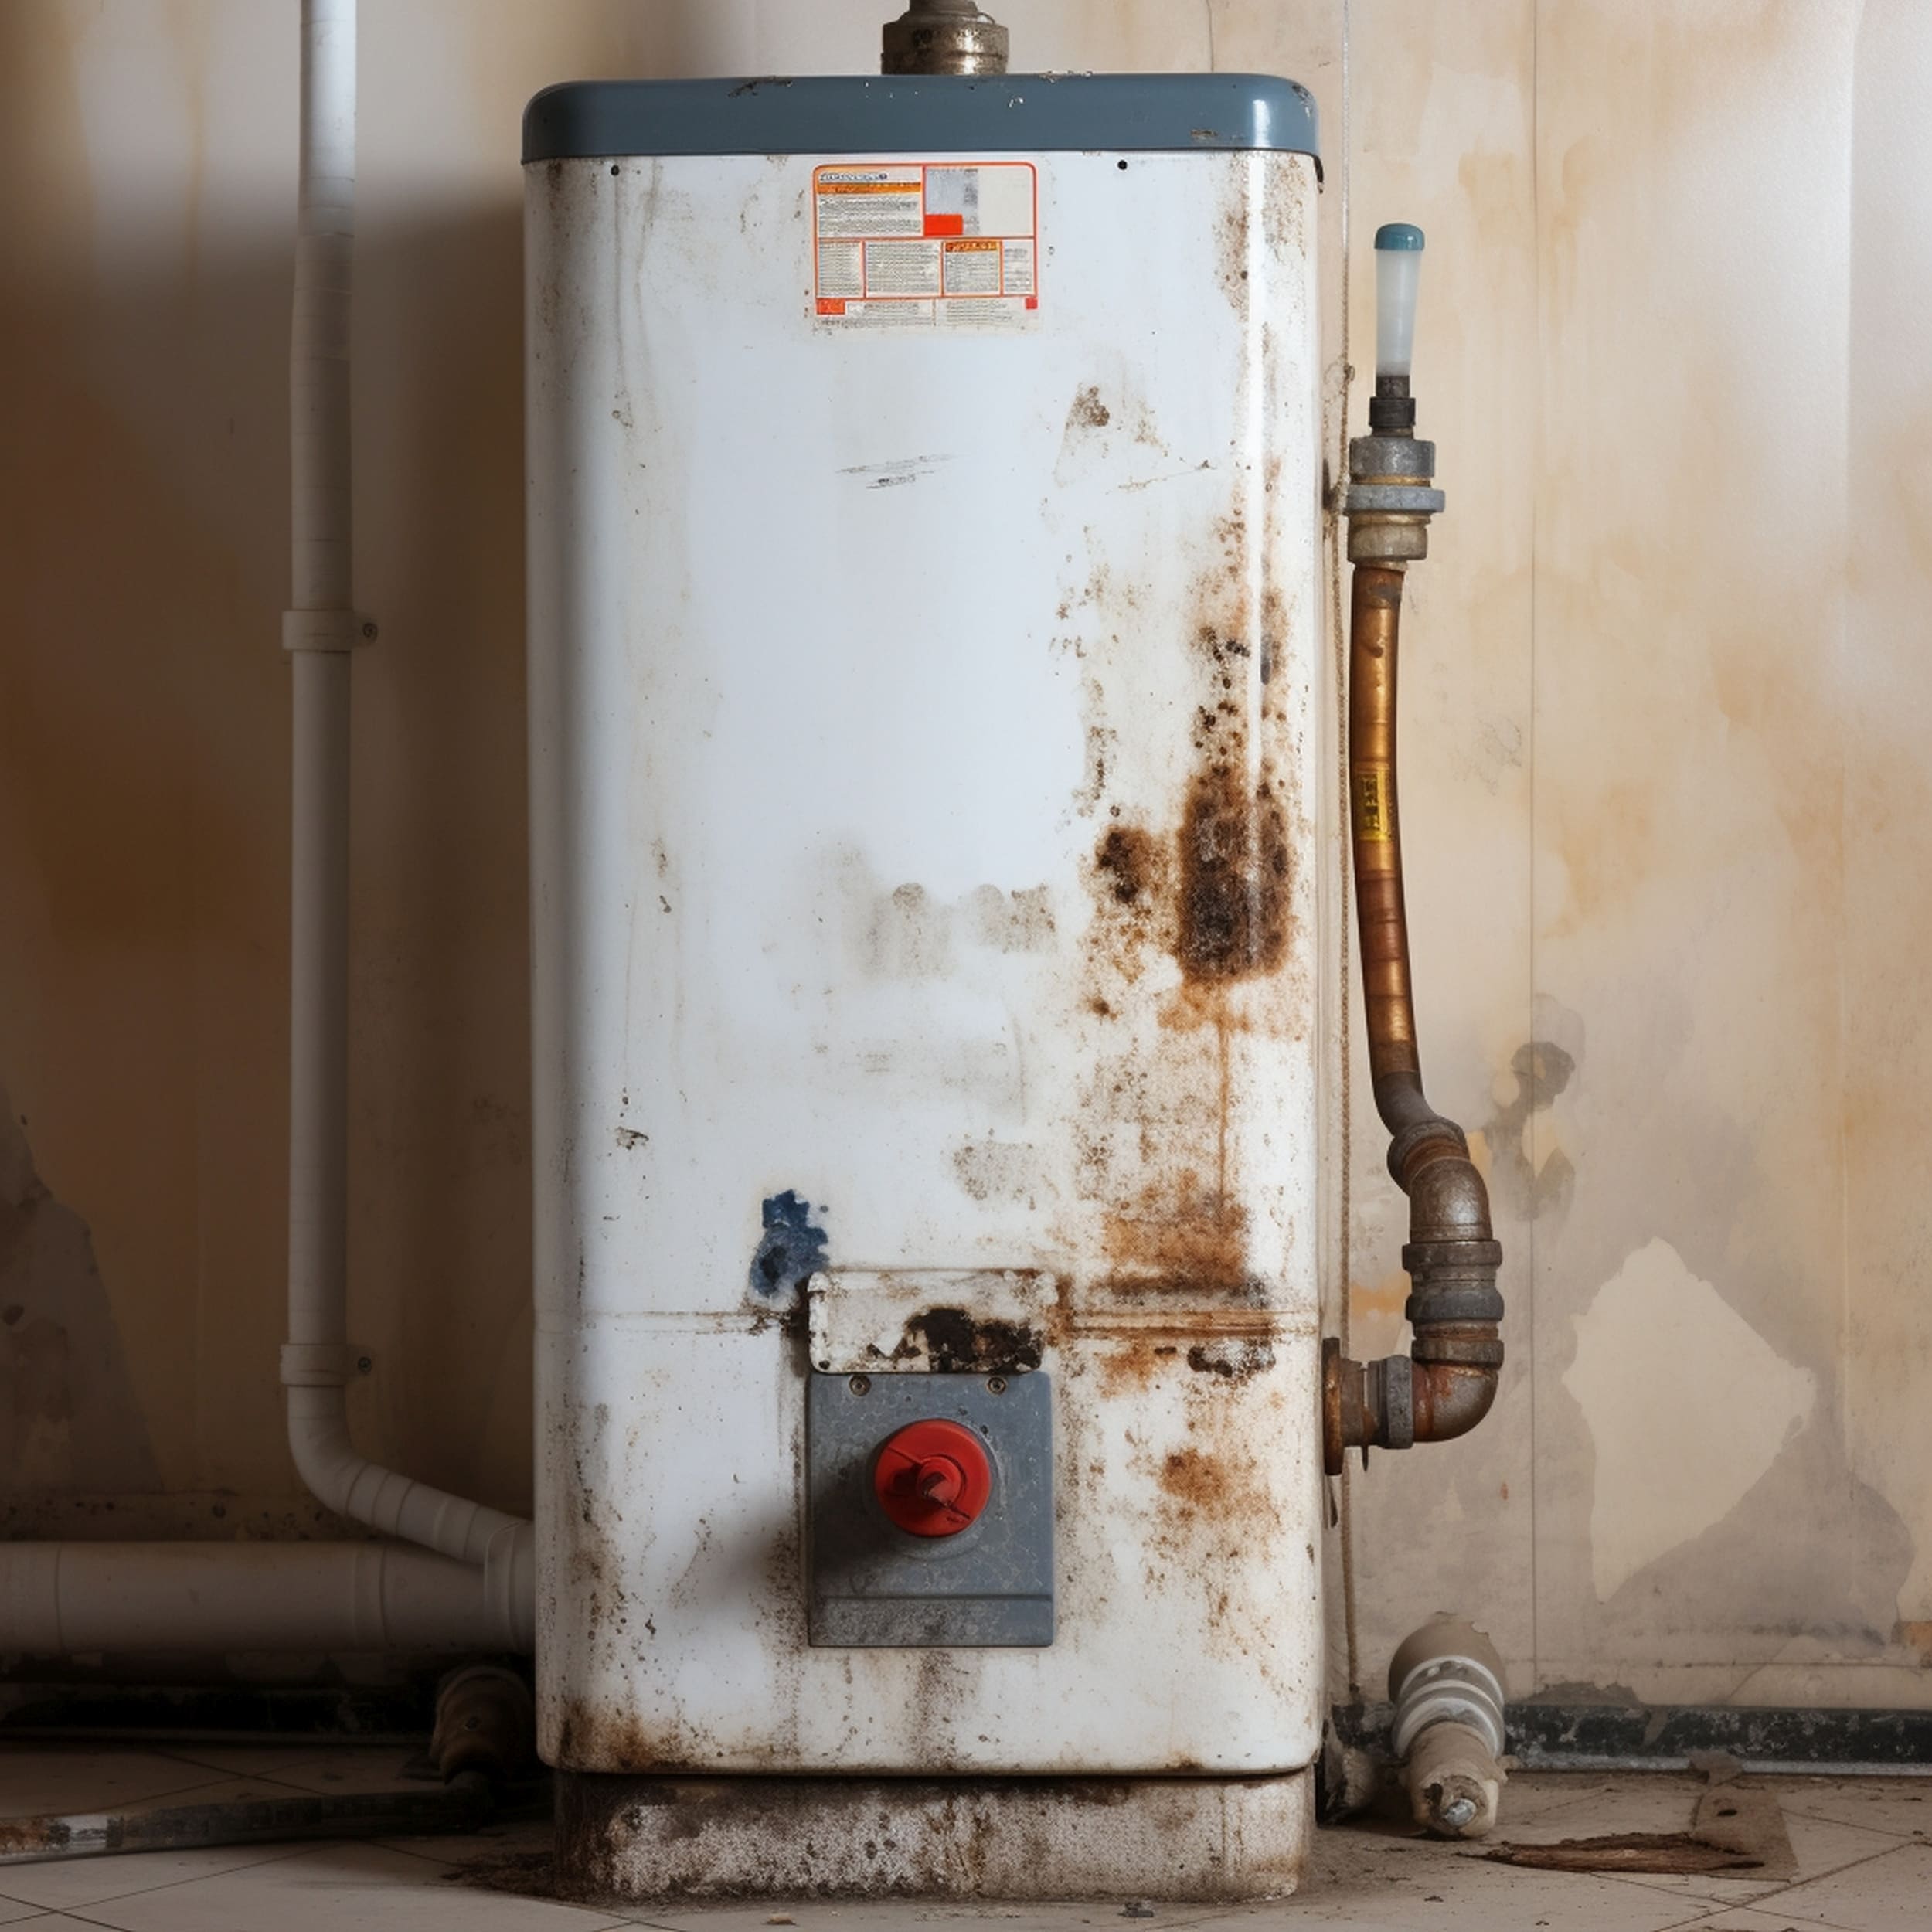 Poorly Maintained Water Heater Showing Excessive Wear